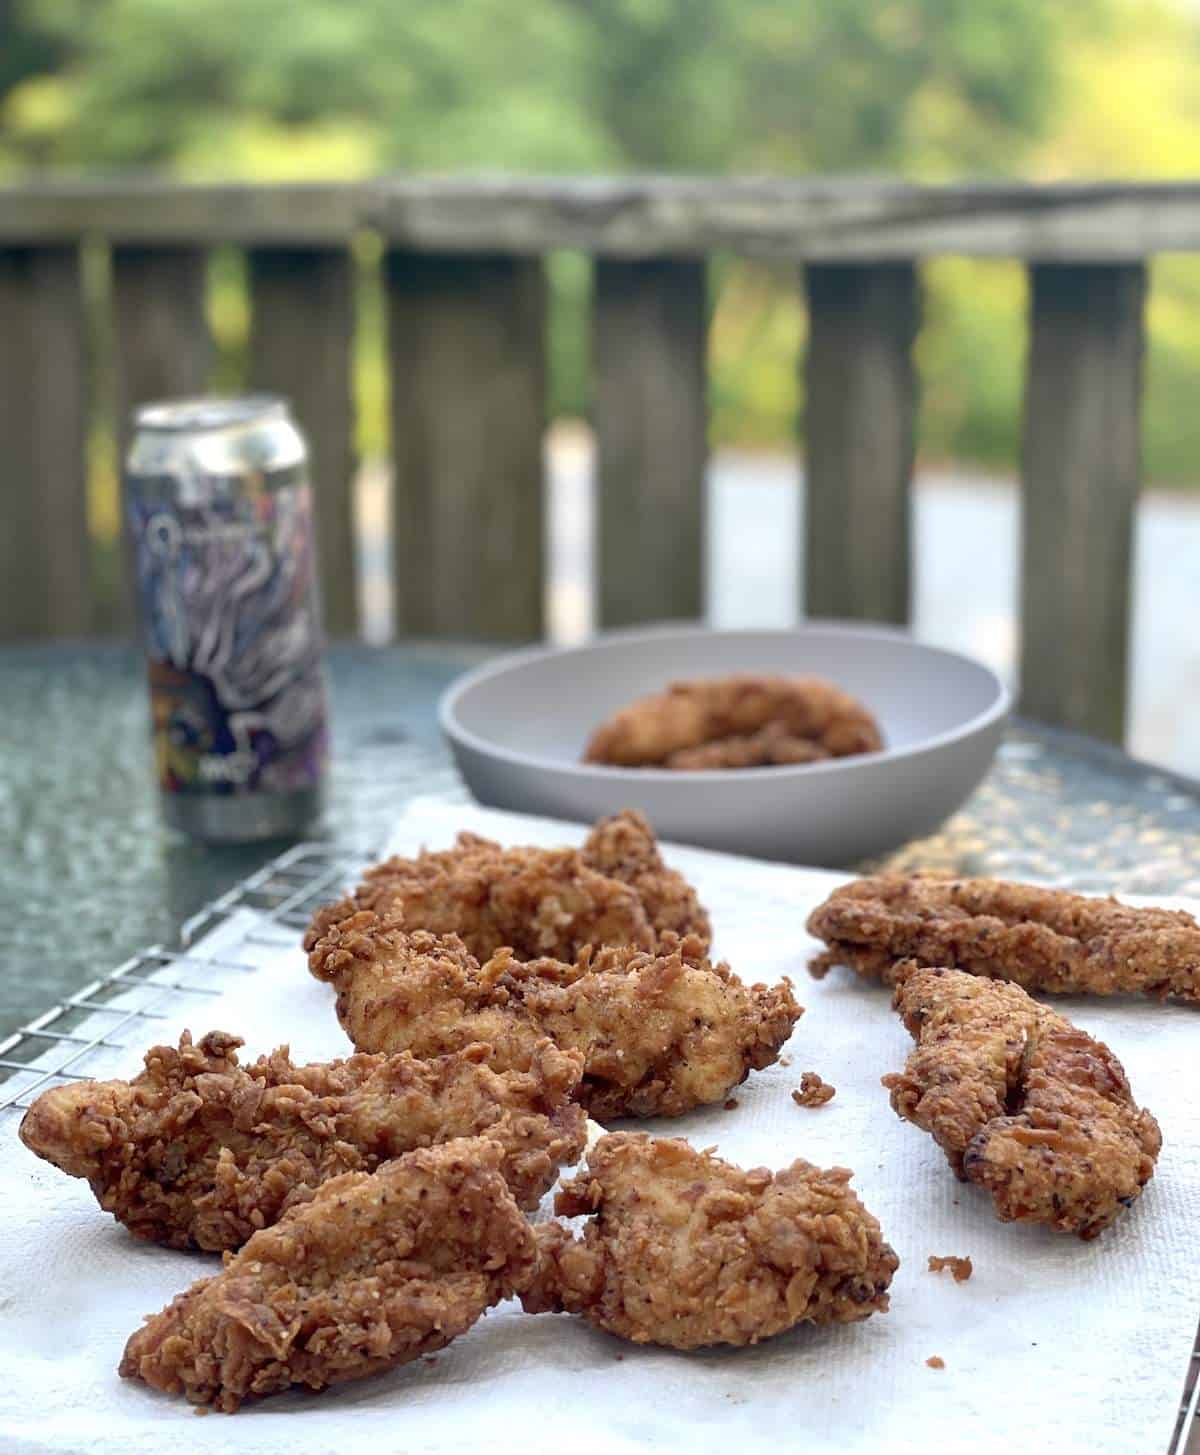 Crispy Fried Chicken Tenders on a paper towel with a beer and a landscape in the background.